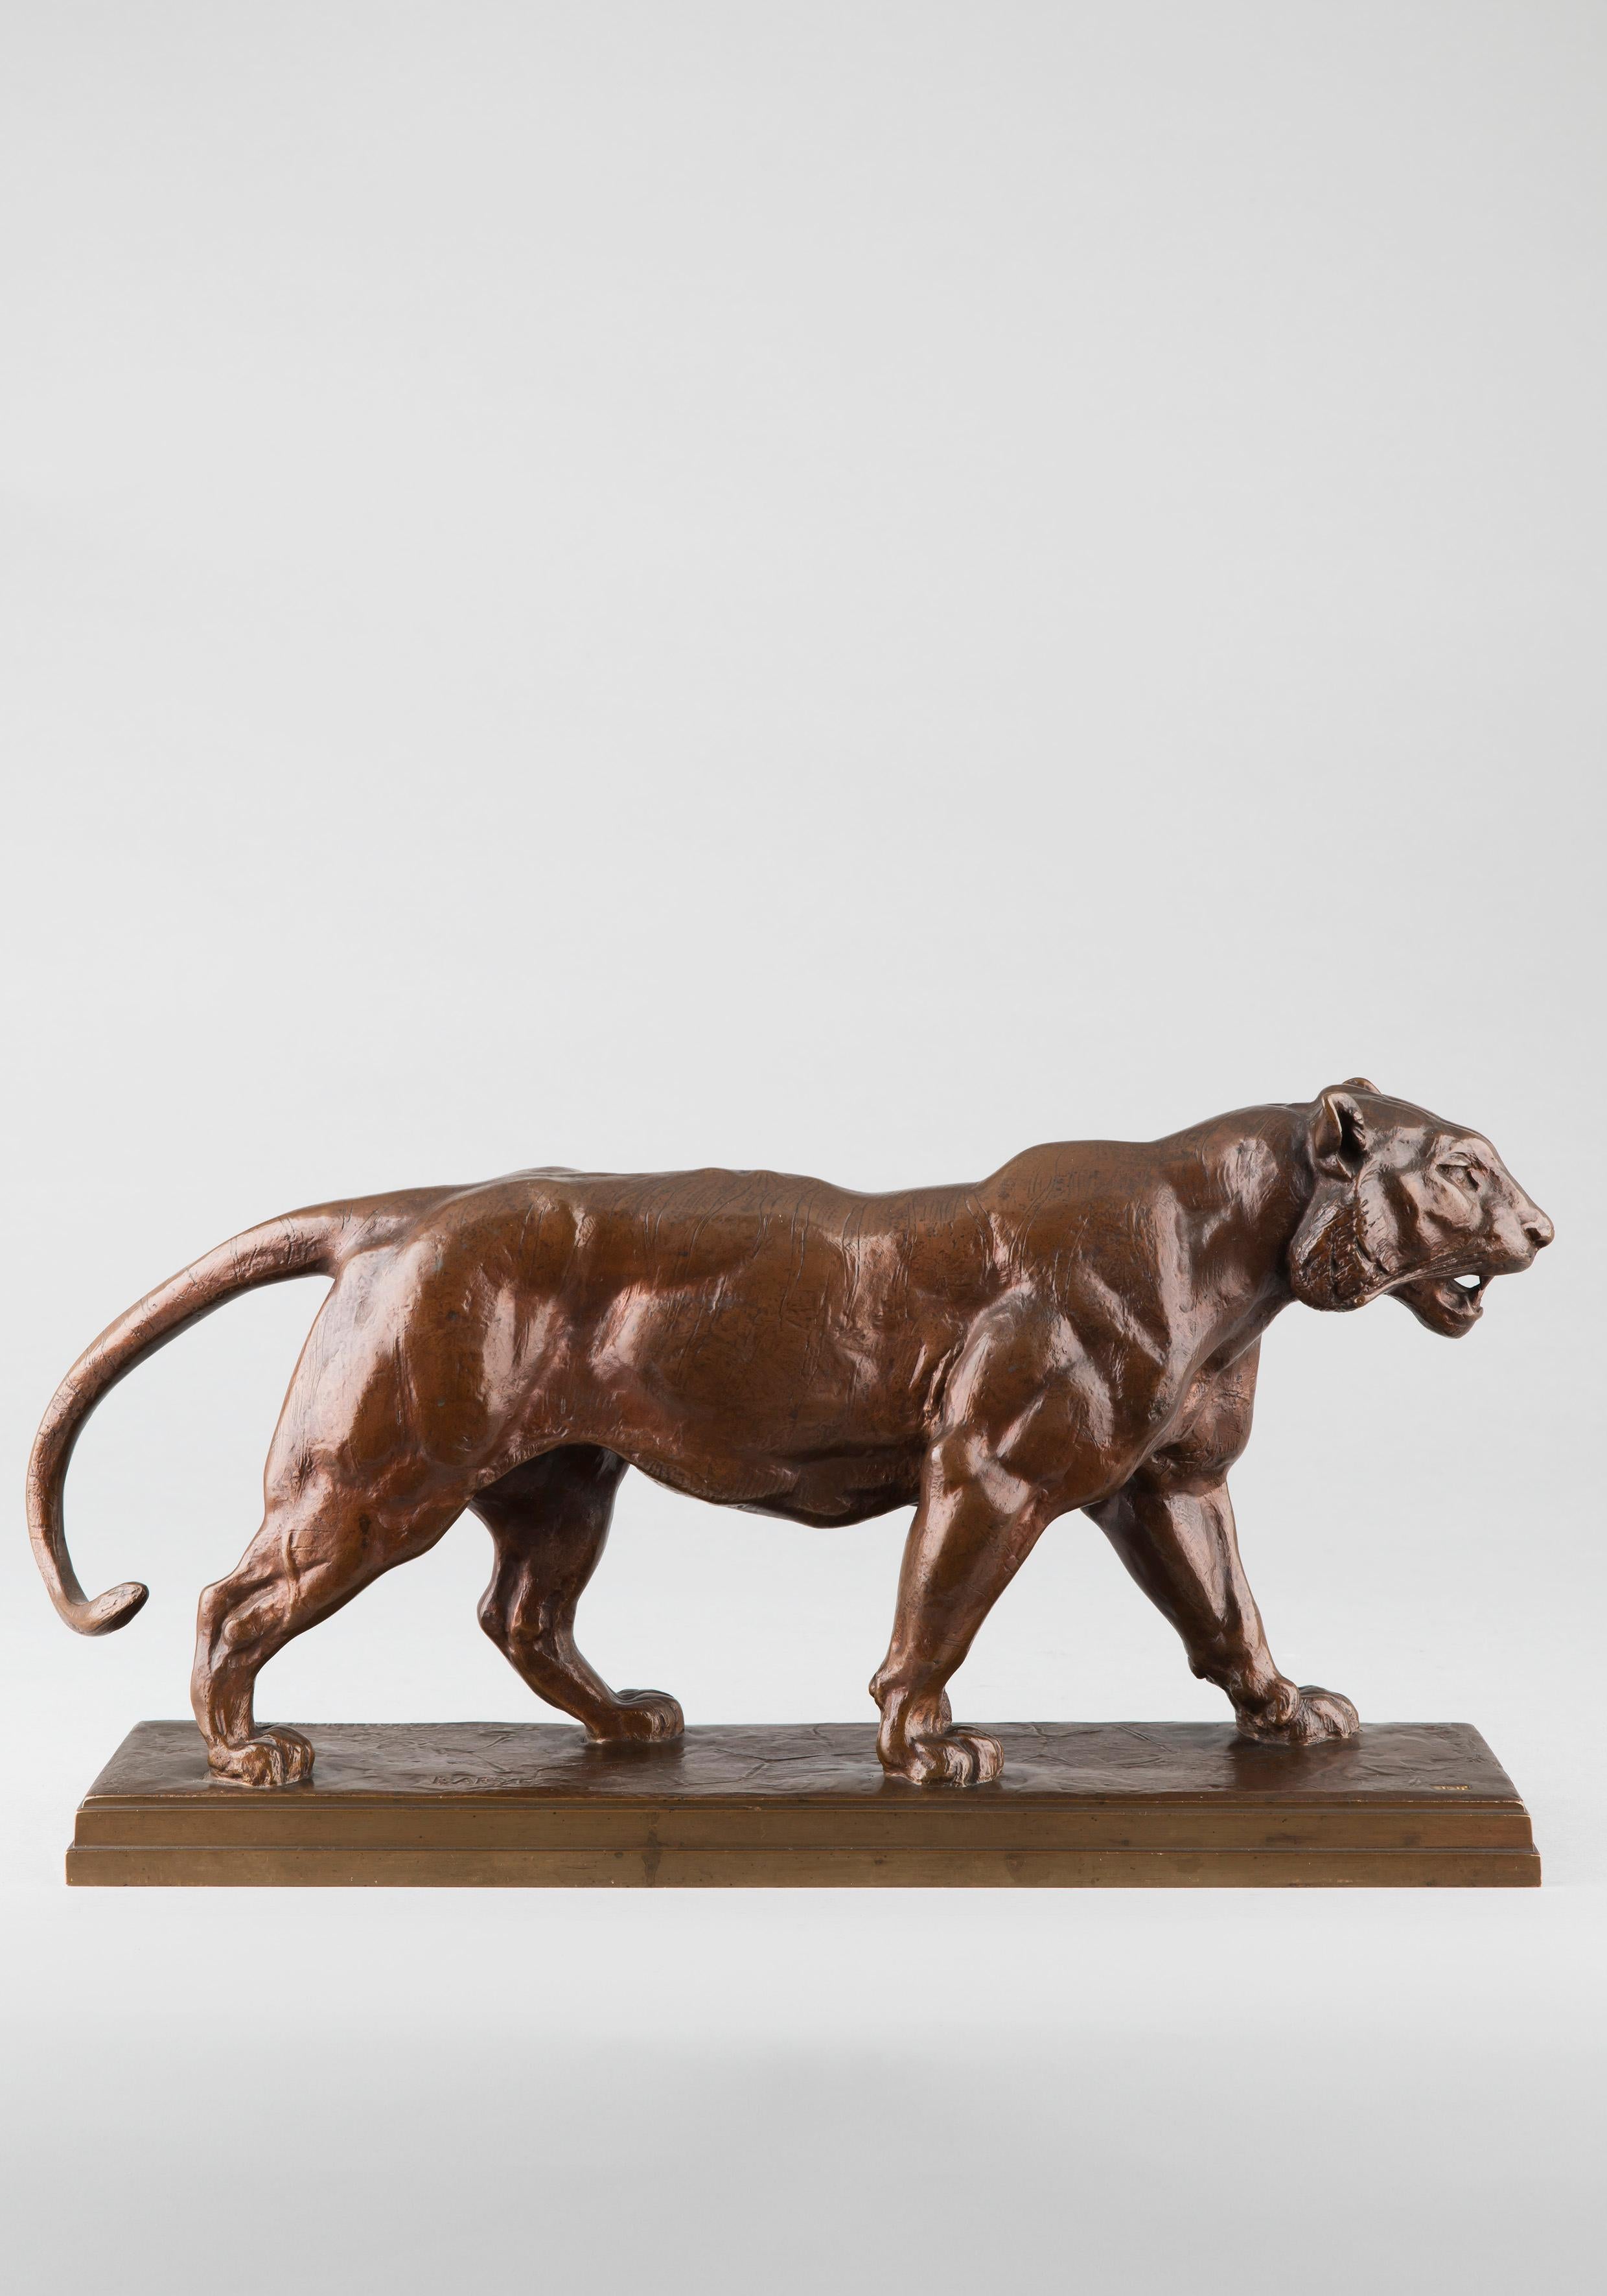 Tiger and Lion walking - Sculpture by Antoine-Louis Barye